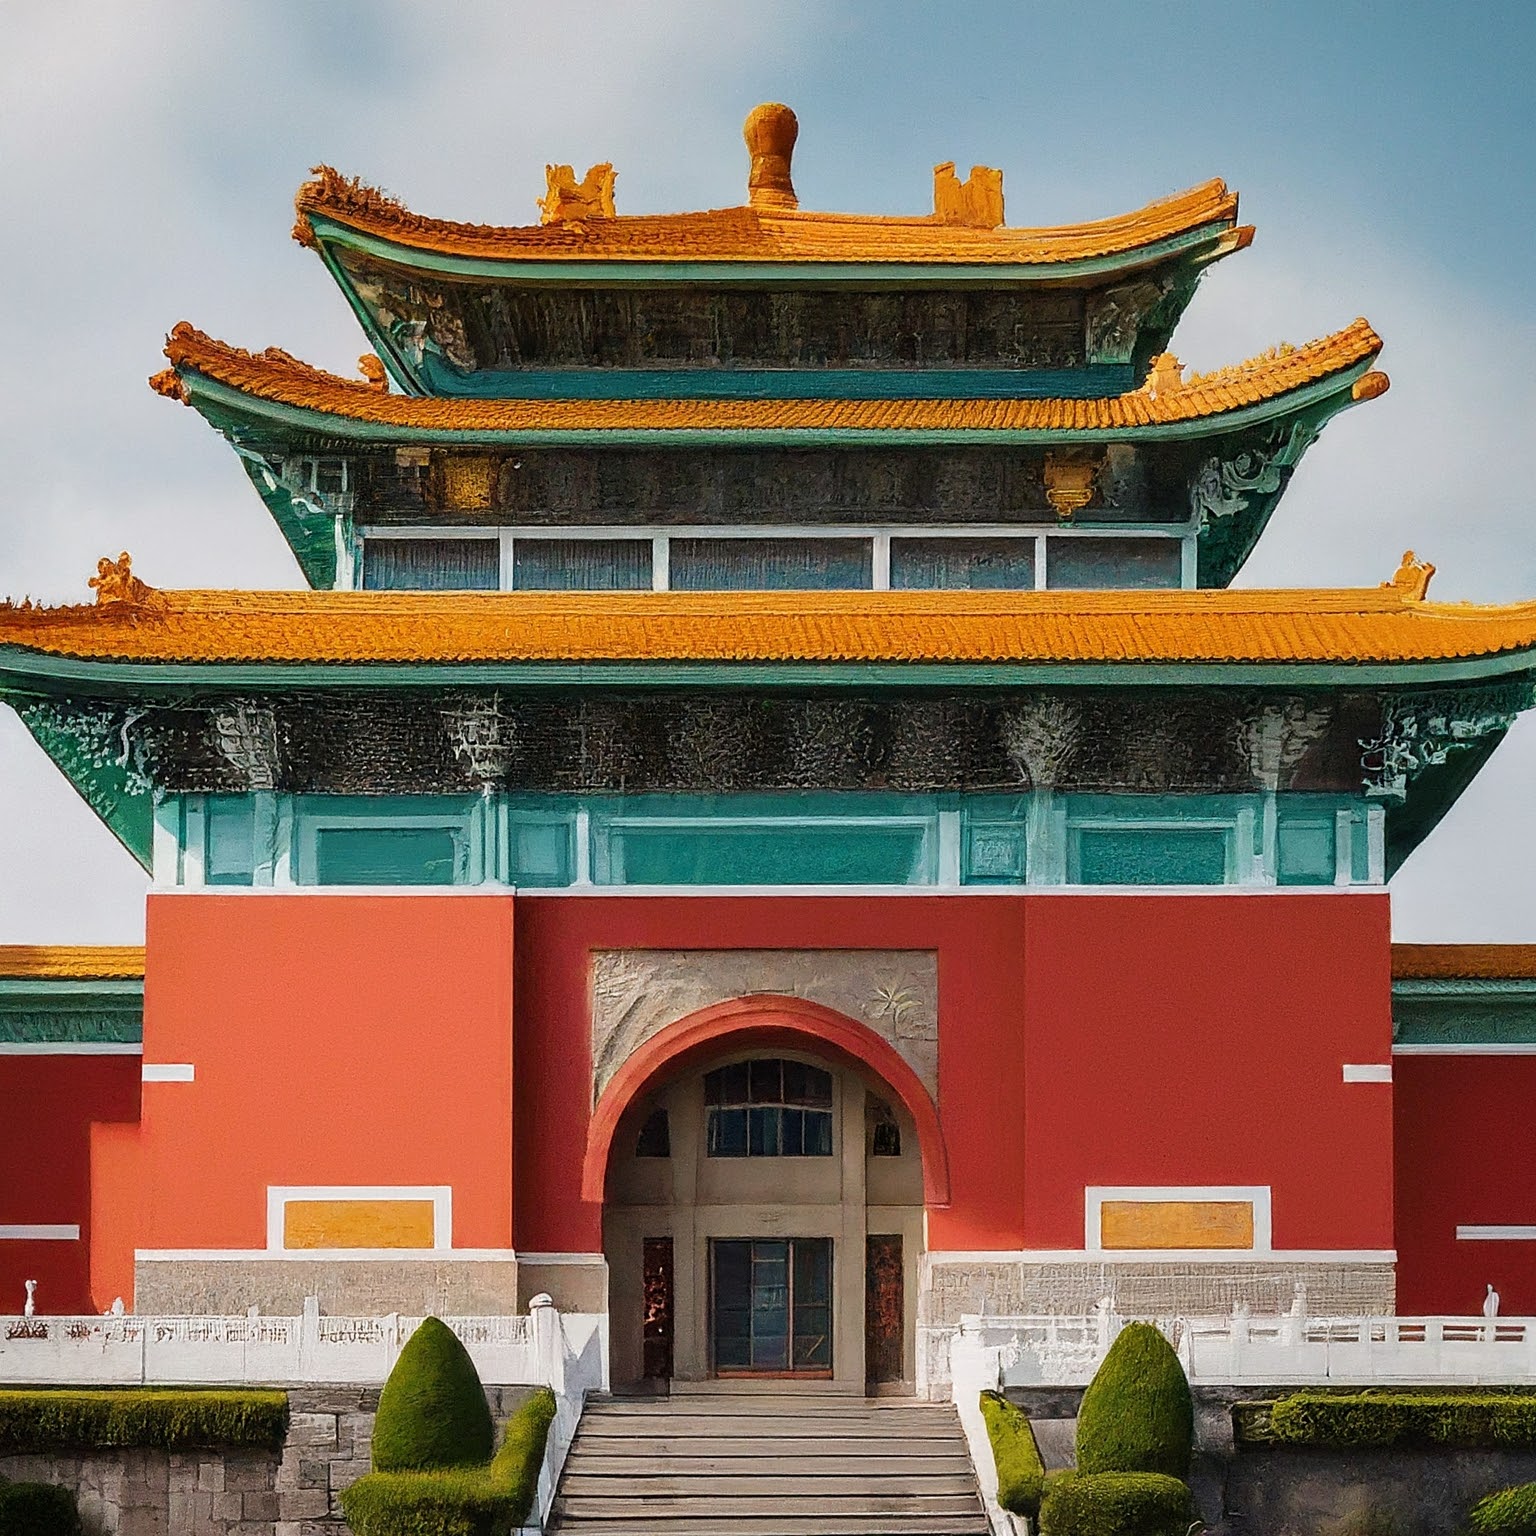 the National Palace Museum, Taiwan. The intricate details and vibrant colors of the artwork are captured in stunning detail.